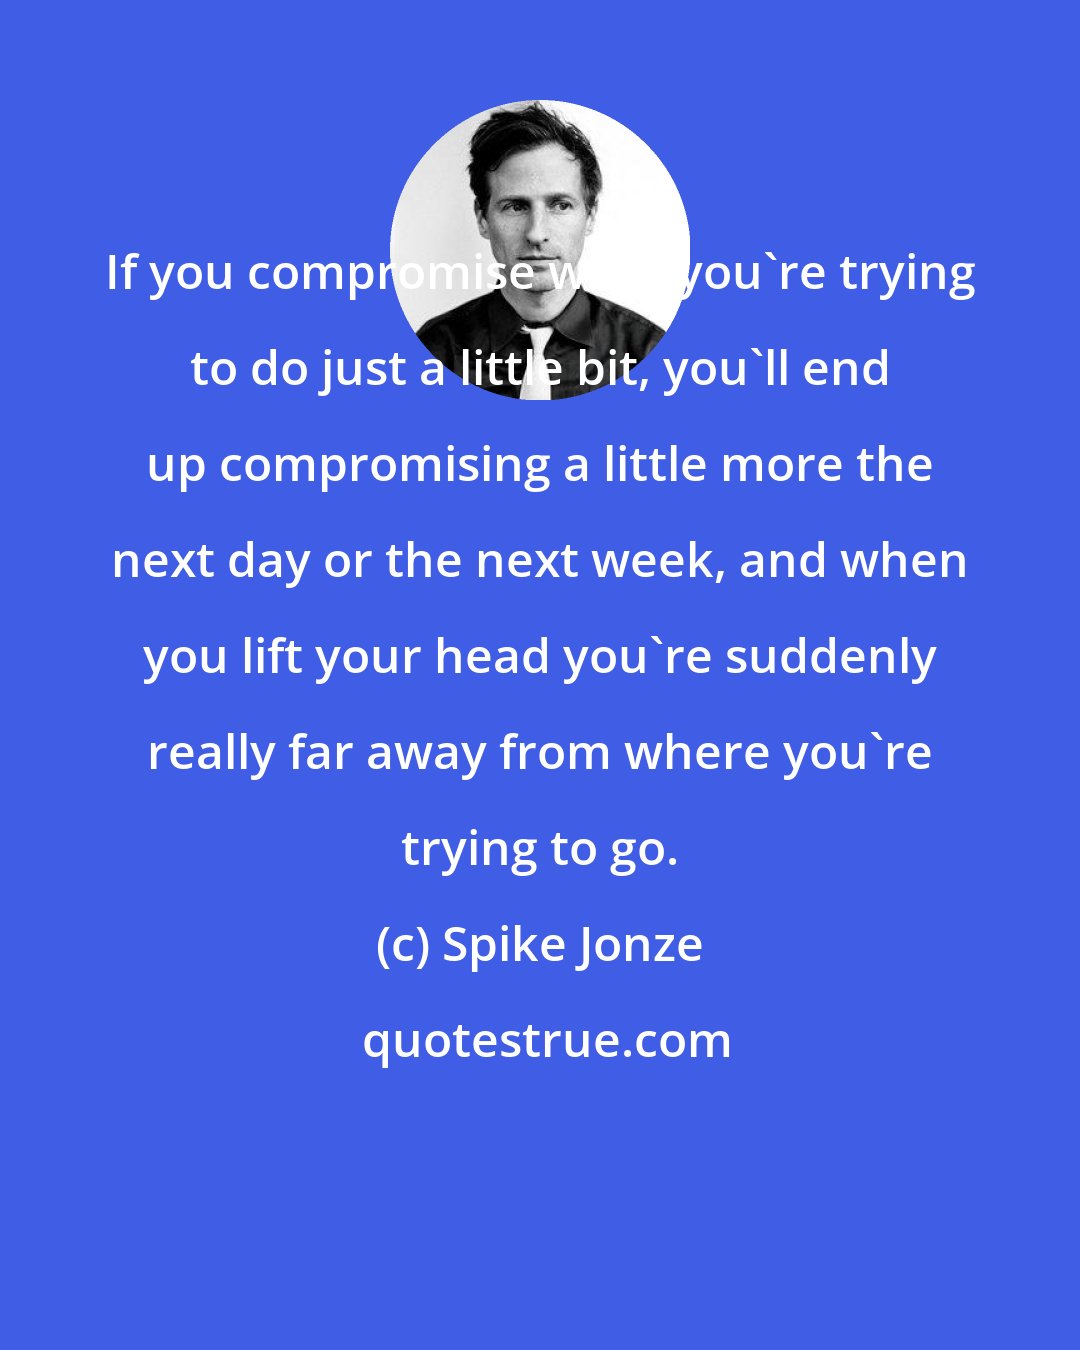 Spike Jonze: If you compromise what you're trying to do just a little bit, you'll end up compromising a little more the next day or the next week, and when you lift your head you're suddenly really far away from where you're trying to go.